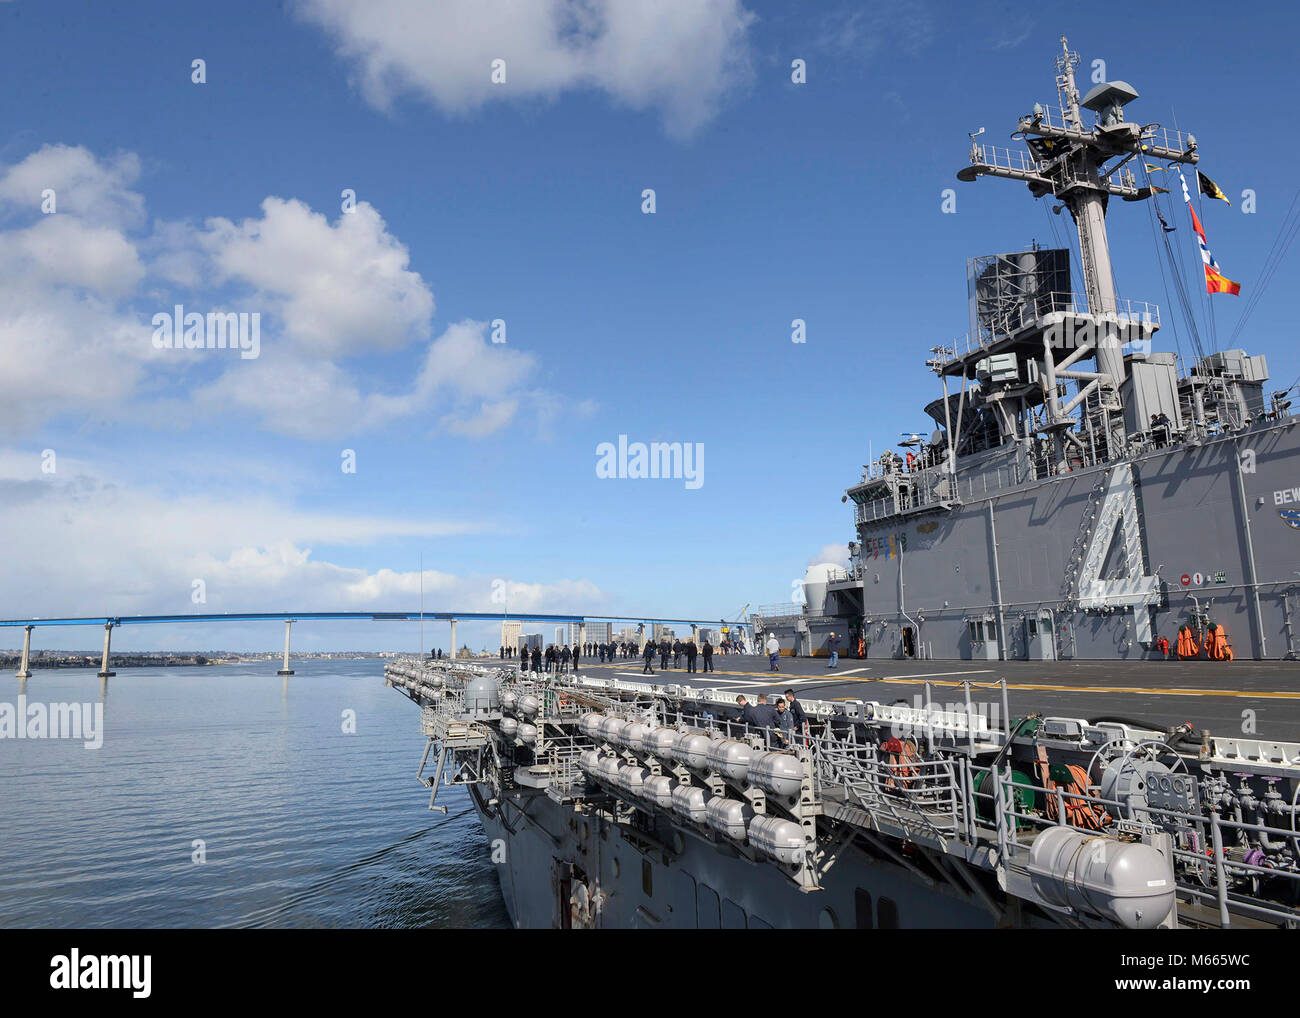 180227-N-PM193-033  SAN DIEGO (Feb. 27, 2018) Amphibious assault ship USS Boxer (LHD 4) approaches the Coronado bridge during the ship’s first at-sea period of 2018. Boxer is underway off the coast of Southern California for contractor sea trials. (U.S. Navy photo by Mass Communication Specialist 3rd Class Alexander C. Kubitza/Released) Stock Photo